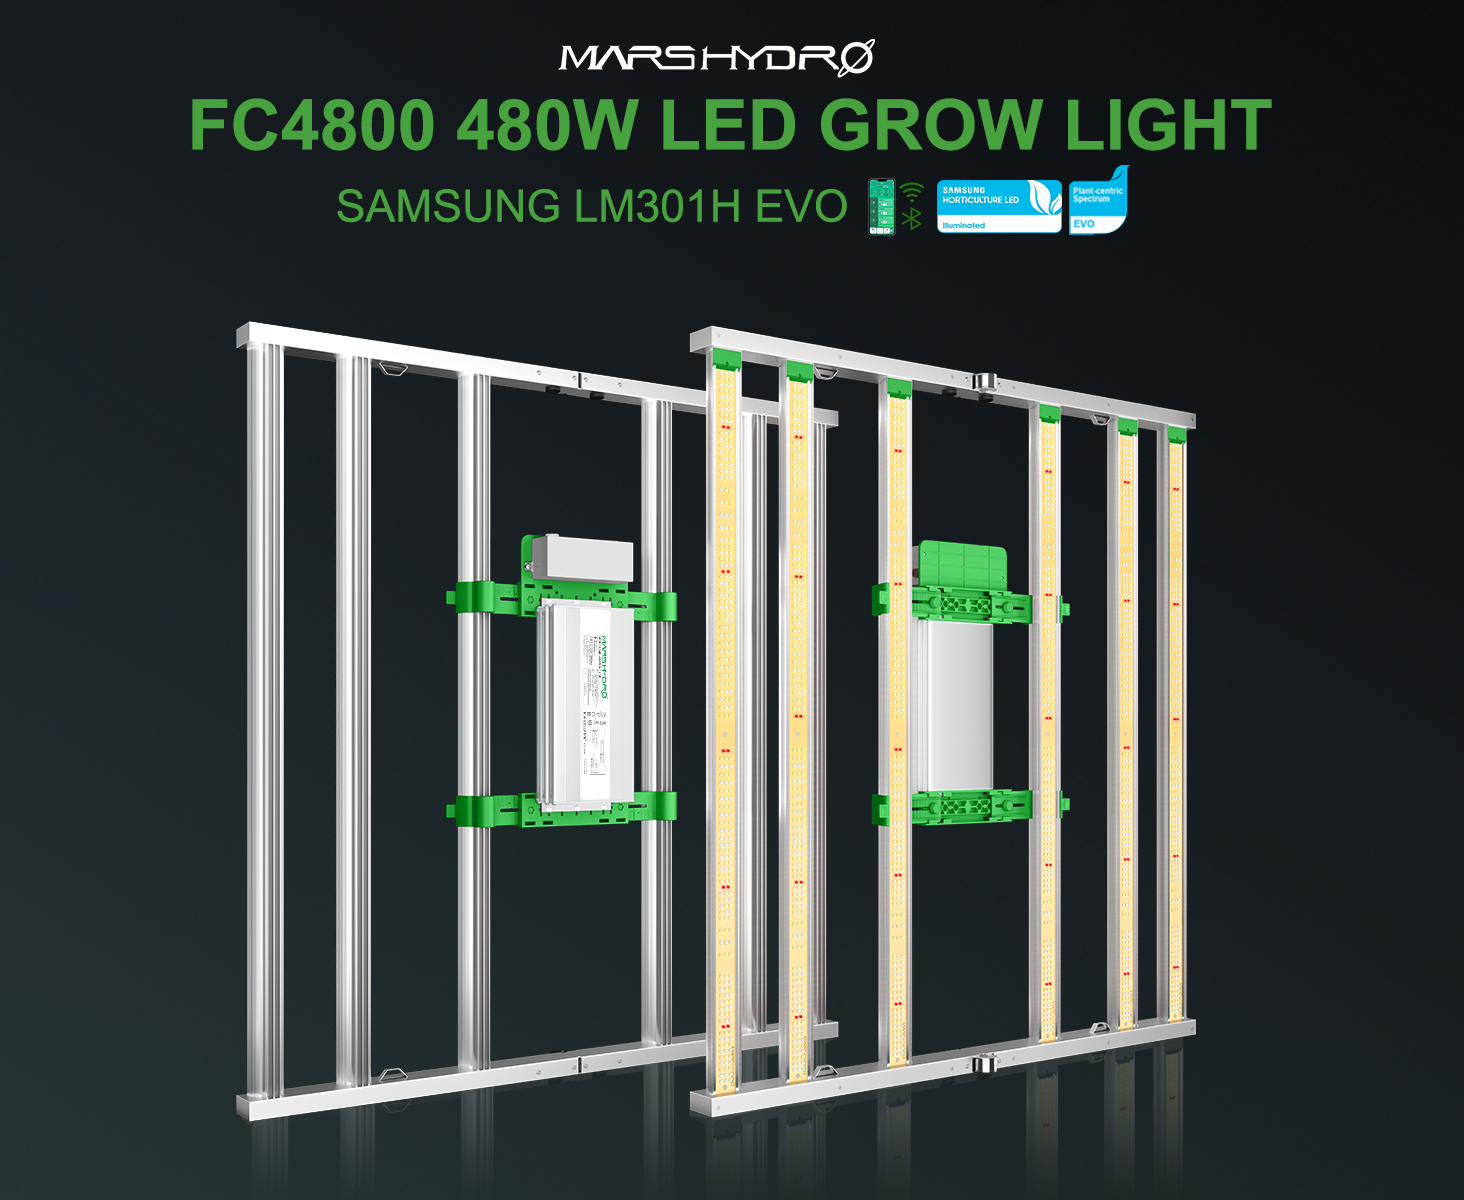 Mars Hydro Smart FC4800 LED Grow Light Samsung LM301H EVO, more convenient to control on phone